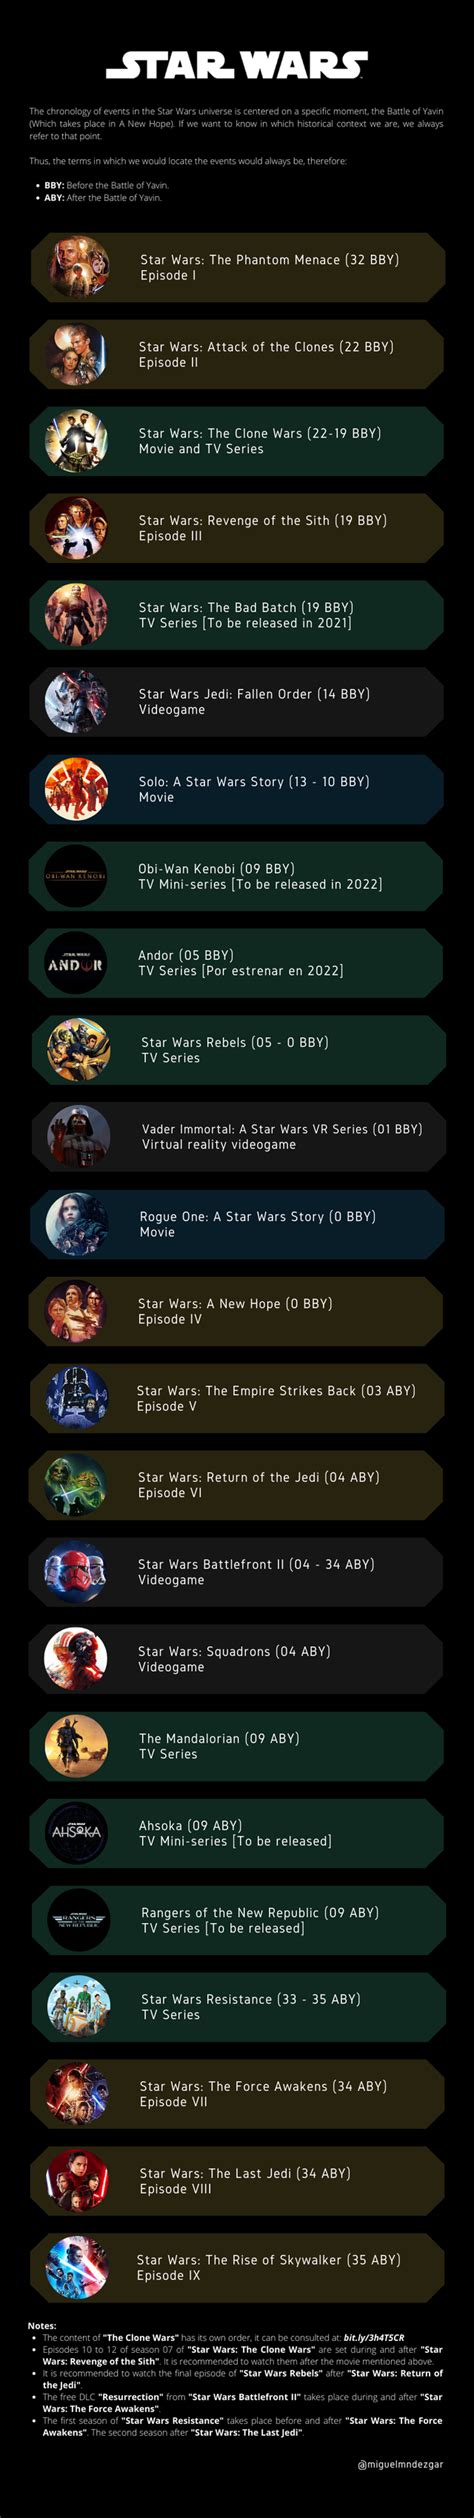 Star Wars Chronological Timeline With Infographic 2023 41 Off